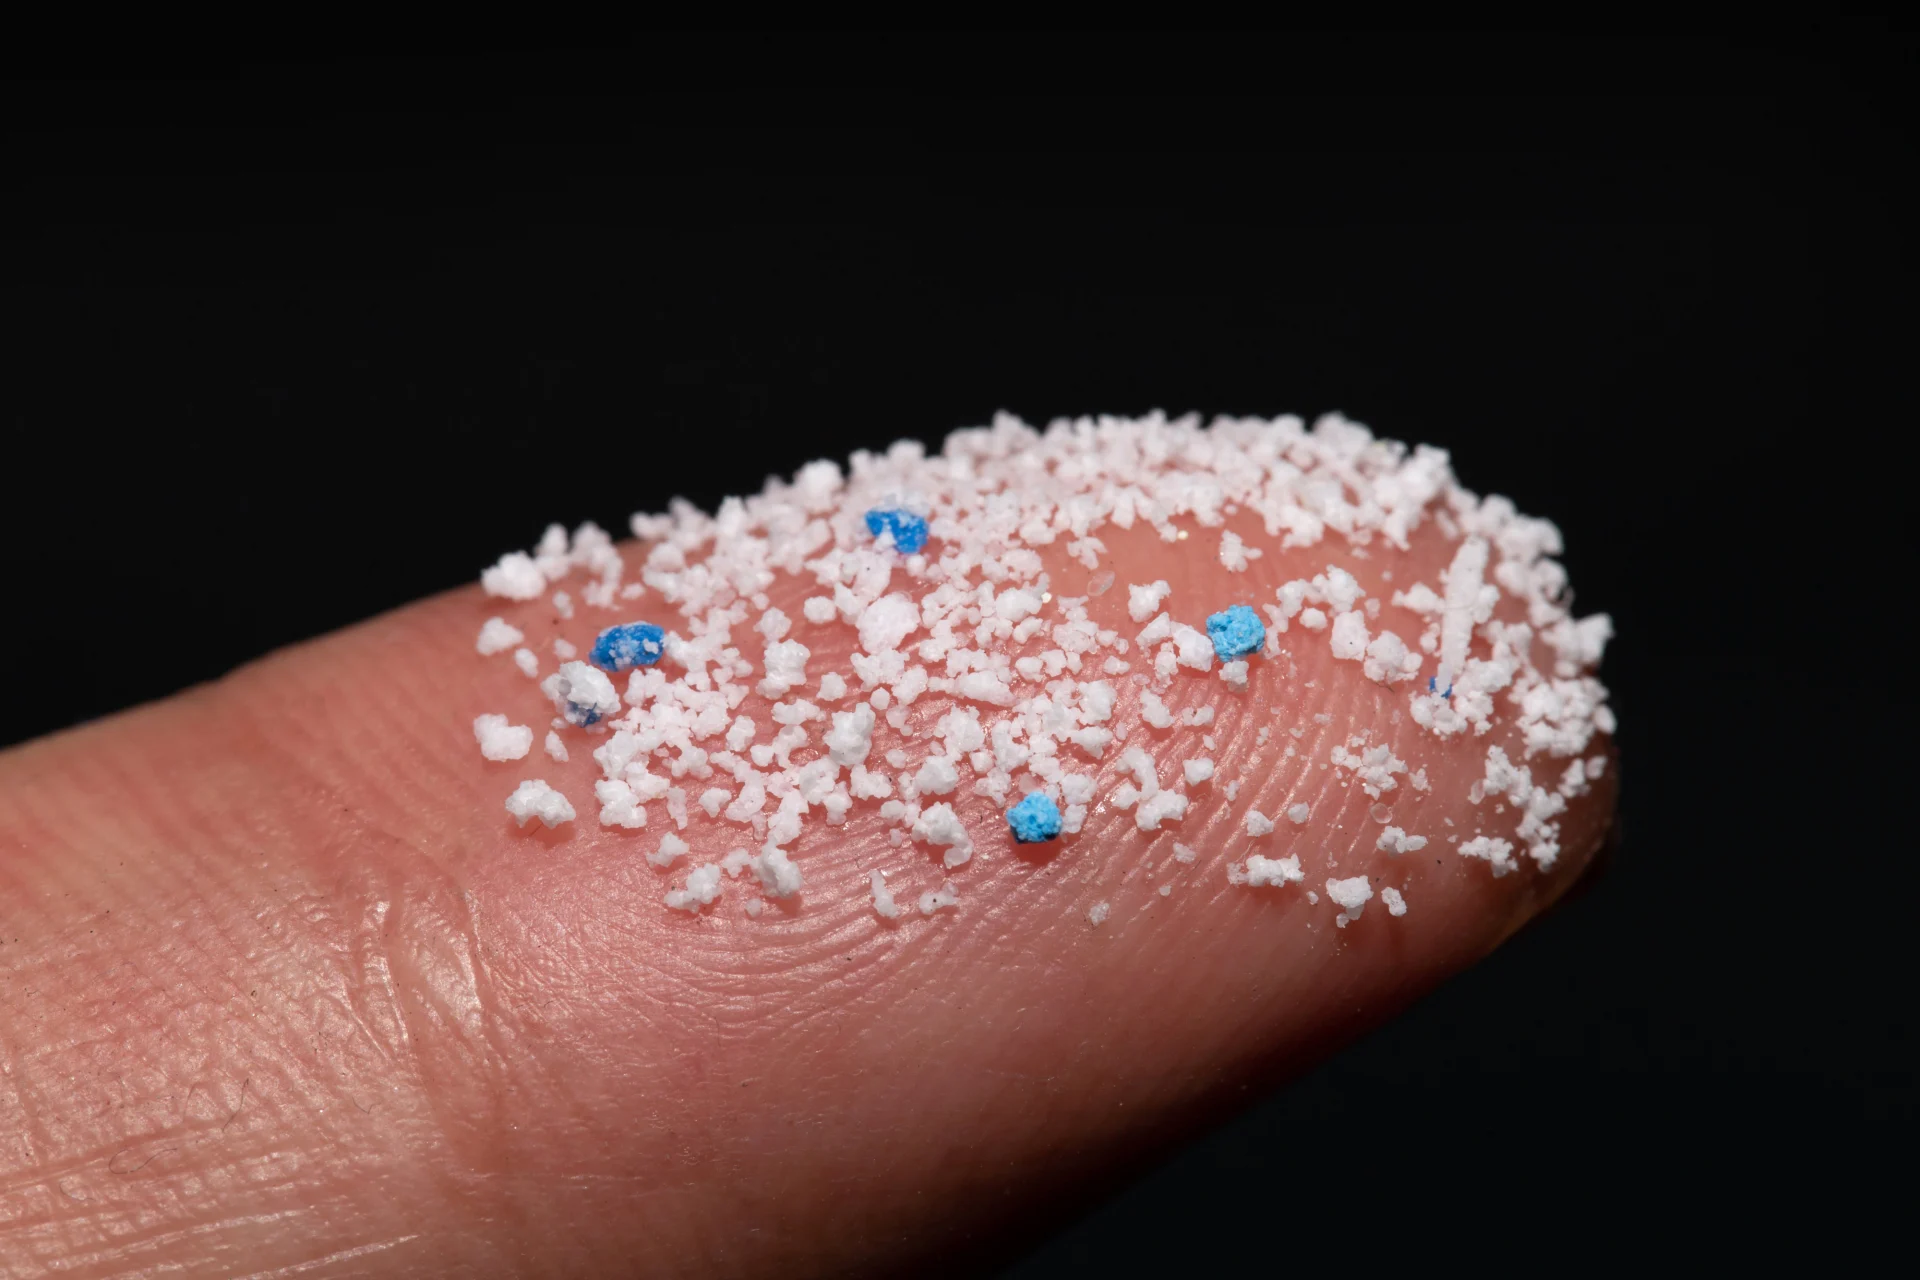 Microplastic in different colours on a fingertip